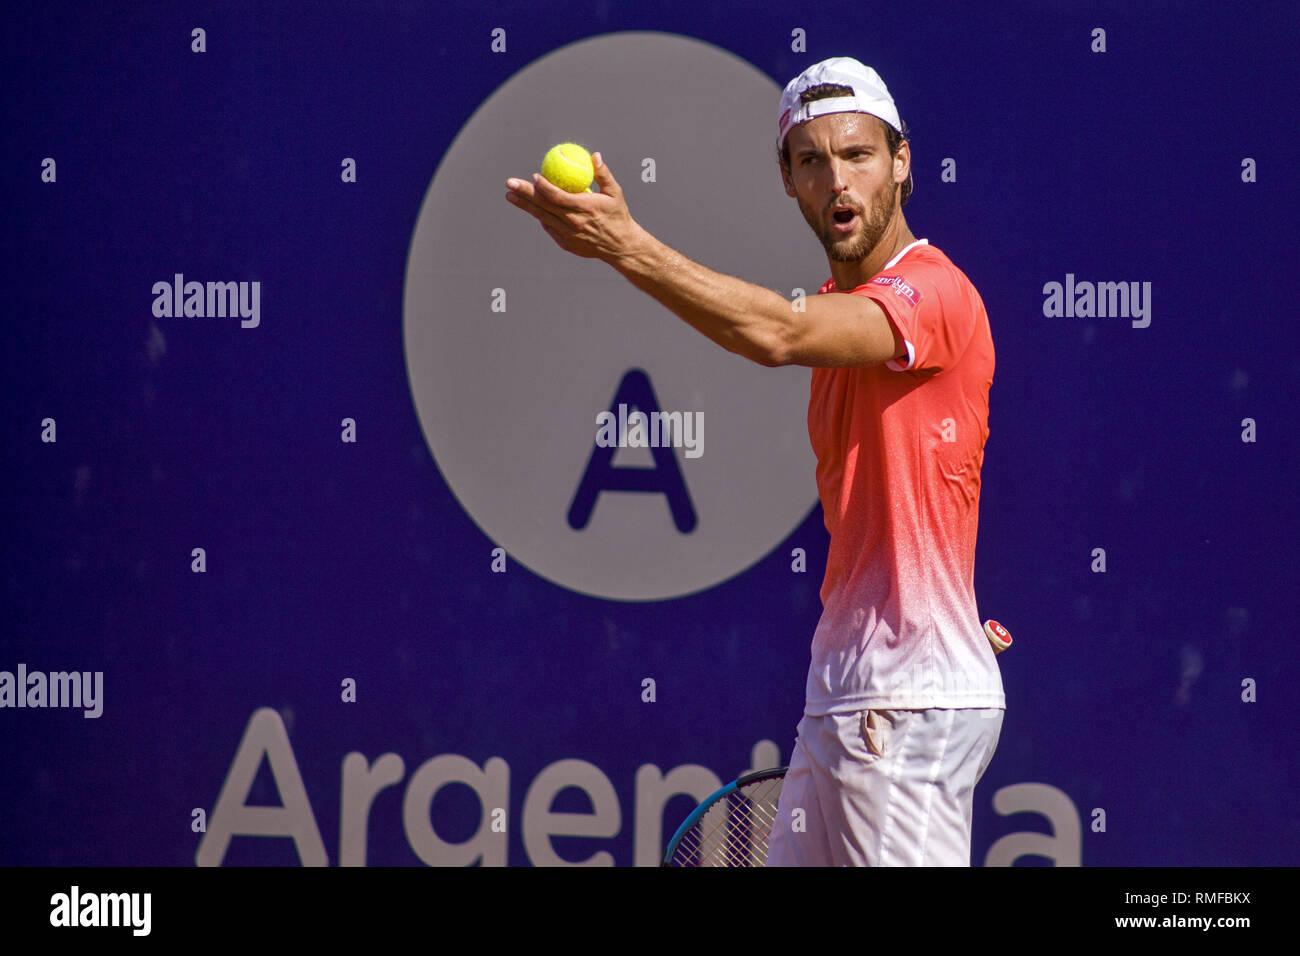 Buenos Aires, Federal Capital, Argentina. 14th Feb, 2019. The Uruguayan Pablo Cuevas achieves his qualification to the quarterfinals in the Argentina Open 2019 after beating the Portuguese Joao Sousa, fifth seed, with a score of 6-4, 7-5. His opponent will be Dominic Thiem, from Austria, the favorite and first seed, after beating the German Maximilian Marterer 6-4; 6-4. Credit: Roberto Almeida Aveledo/ZUMA Wire/Alamy Live News Stock Photo